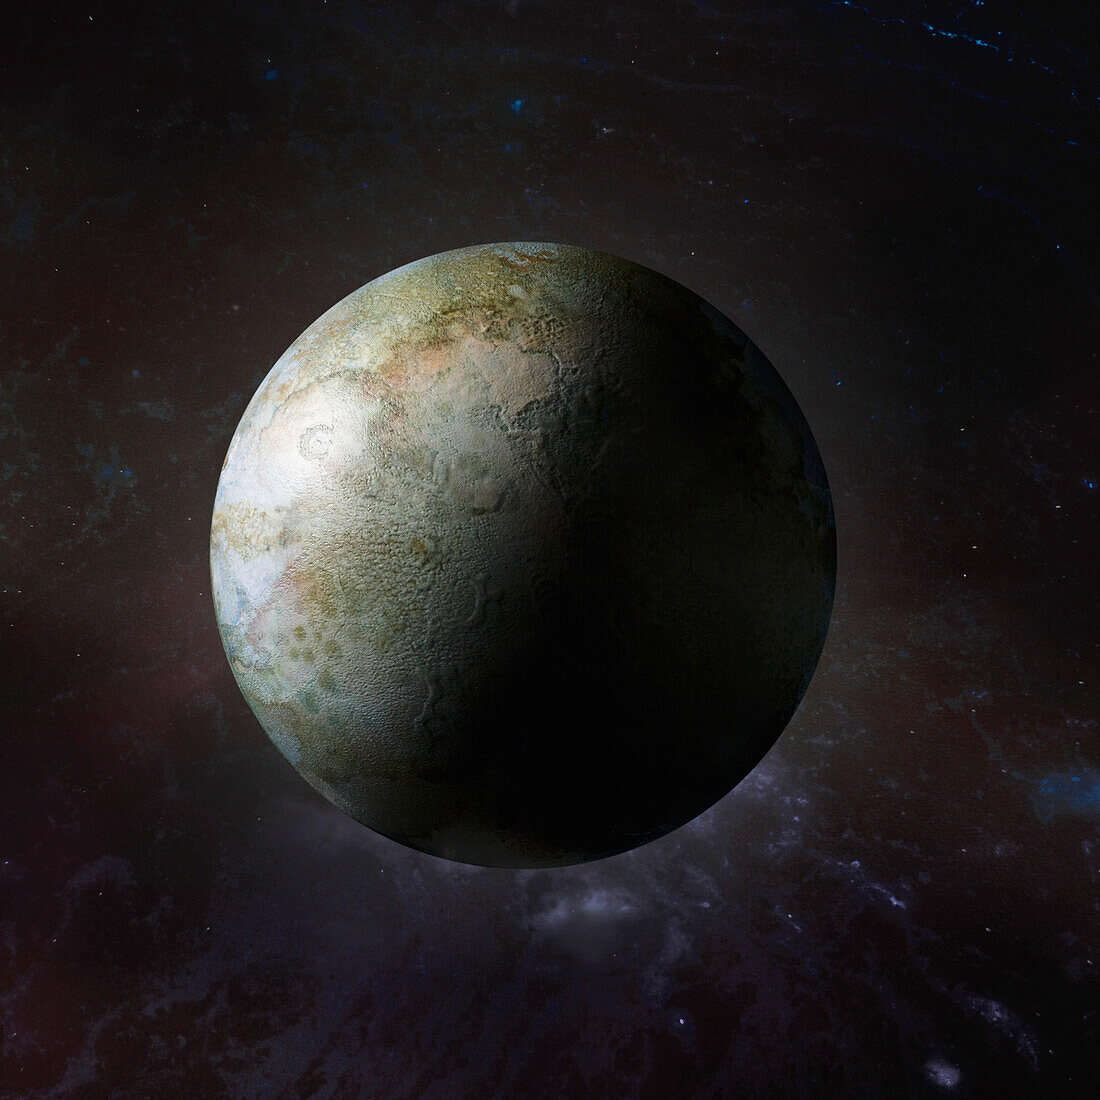 Rocky exoplanet, composite image